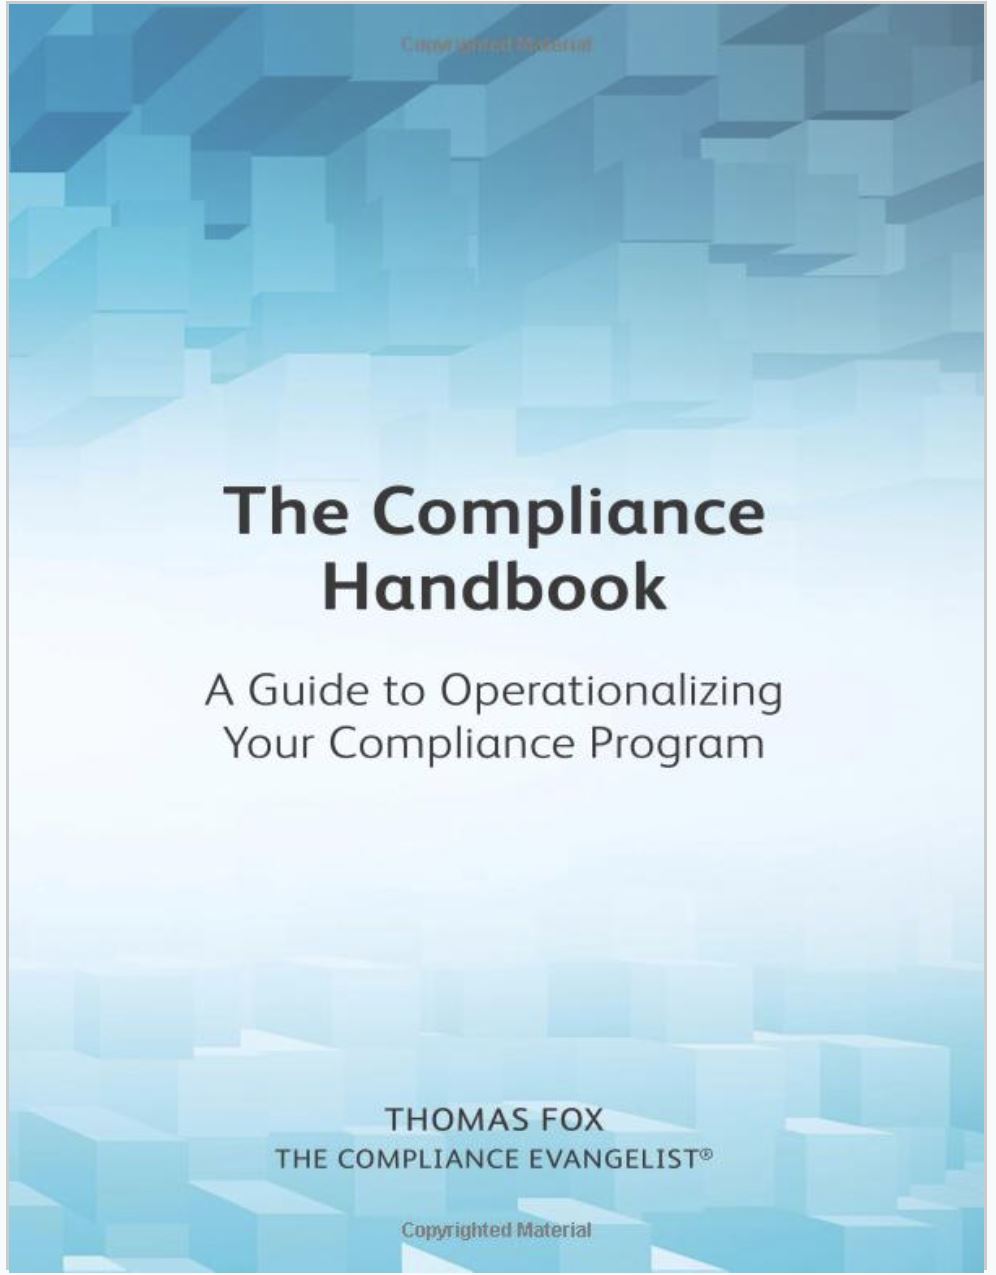 Thought Leadership and Whitepapers - The Compliance Handbook